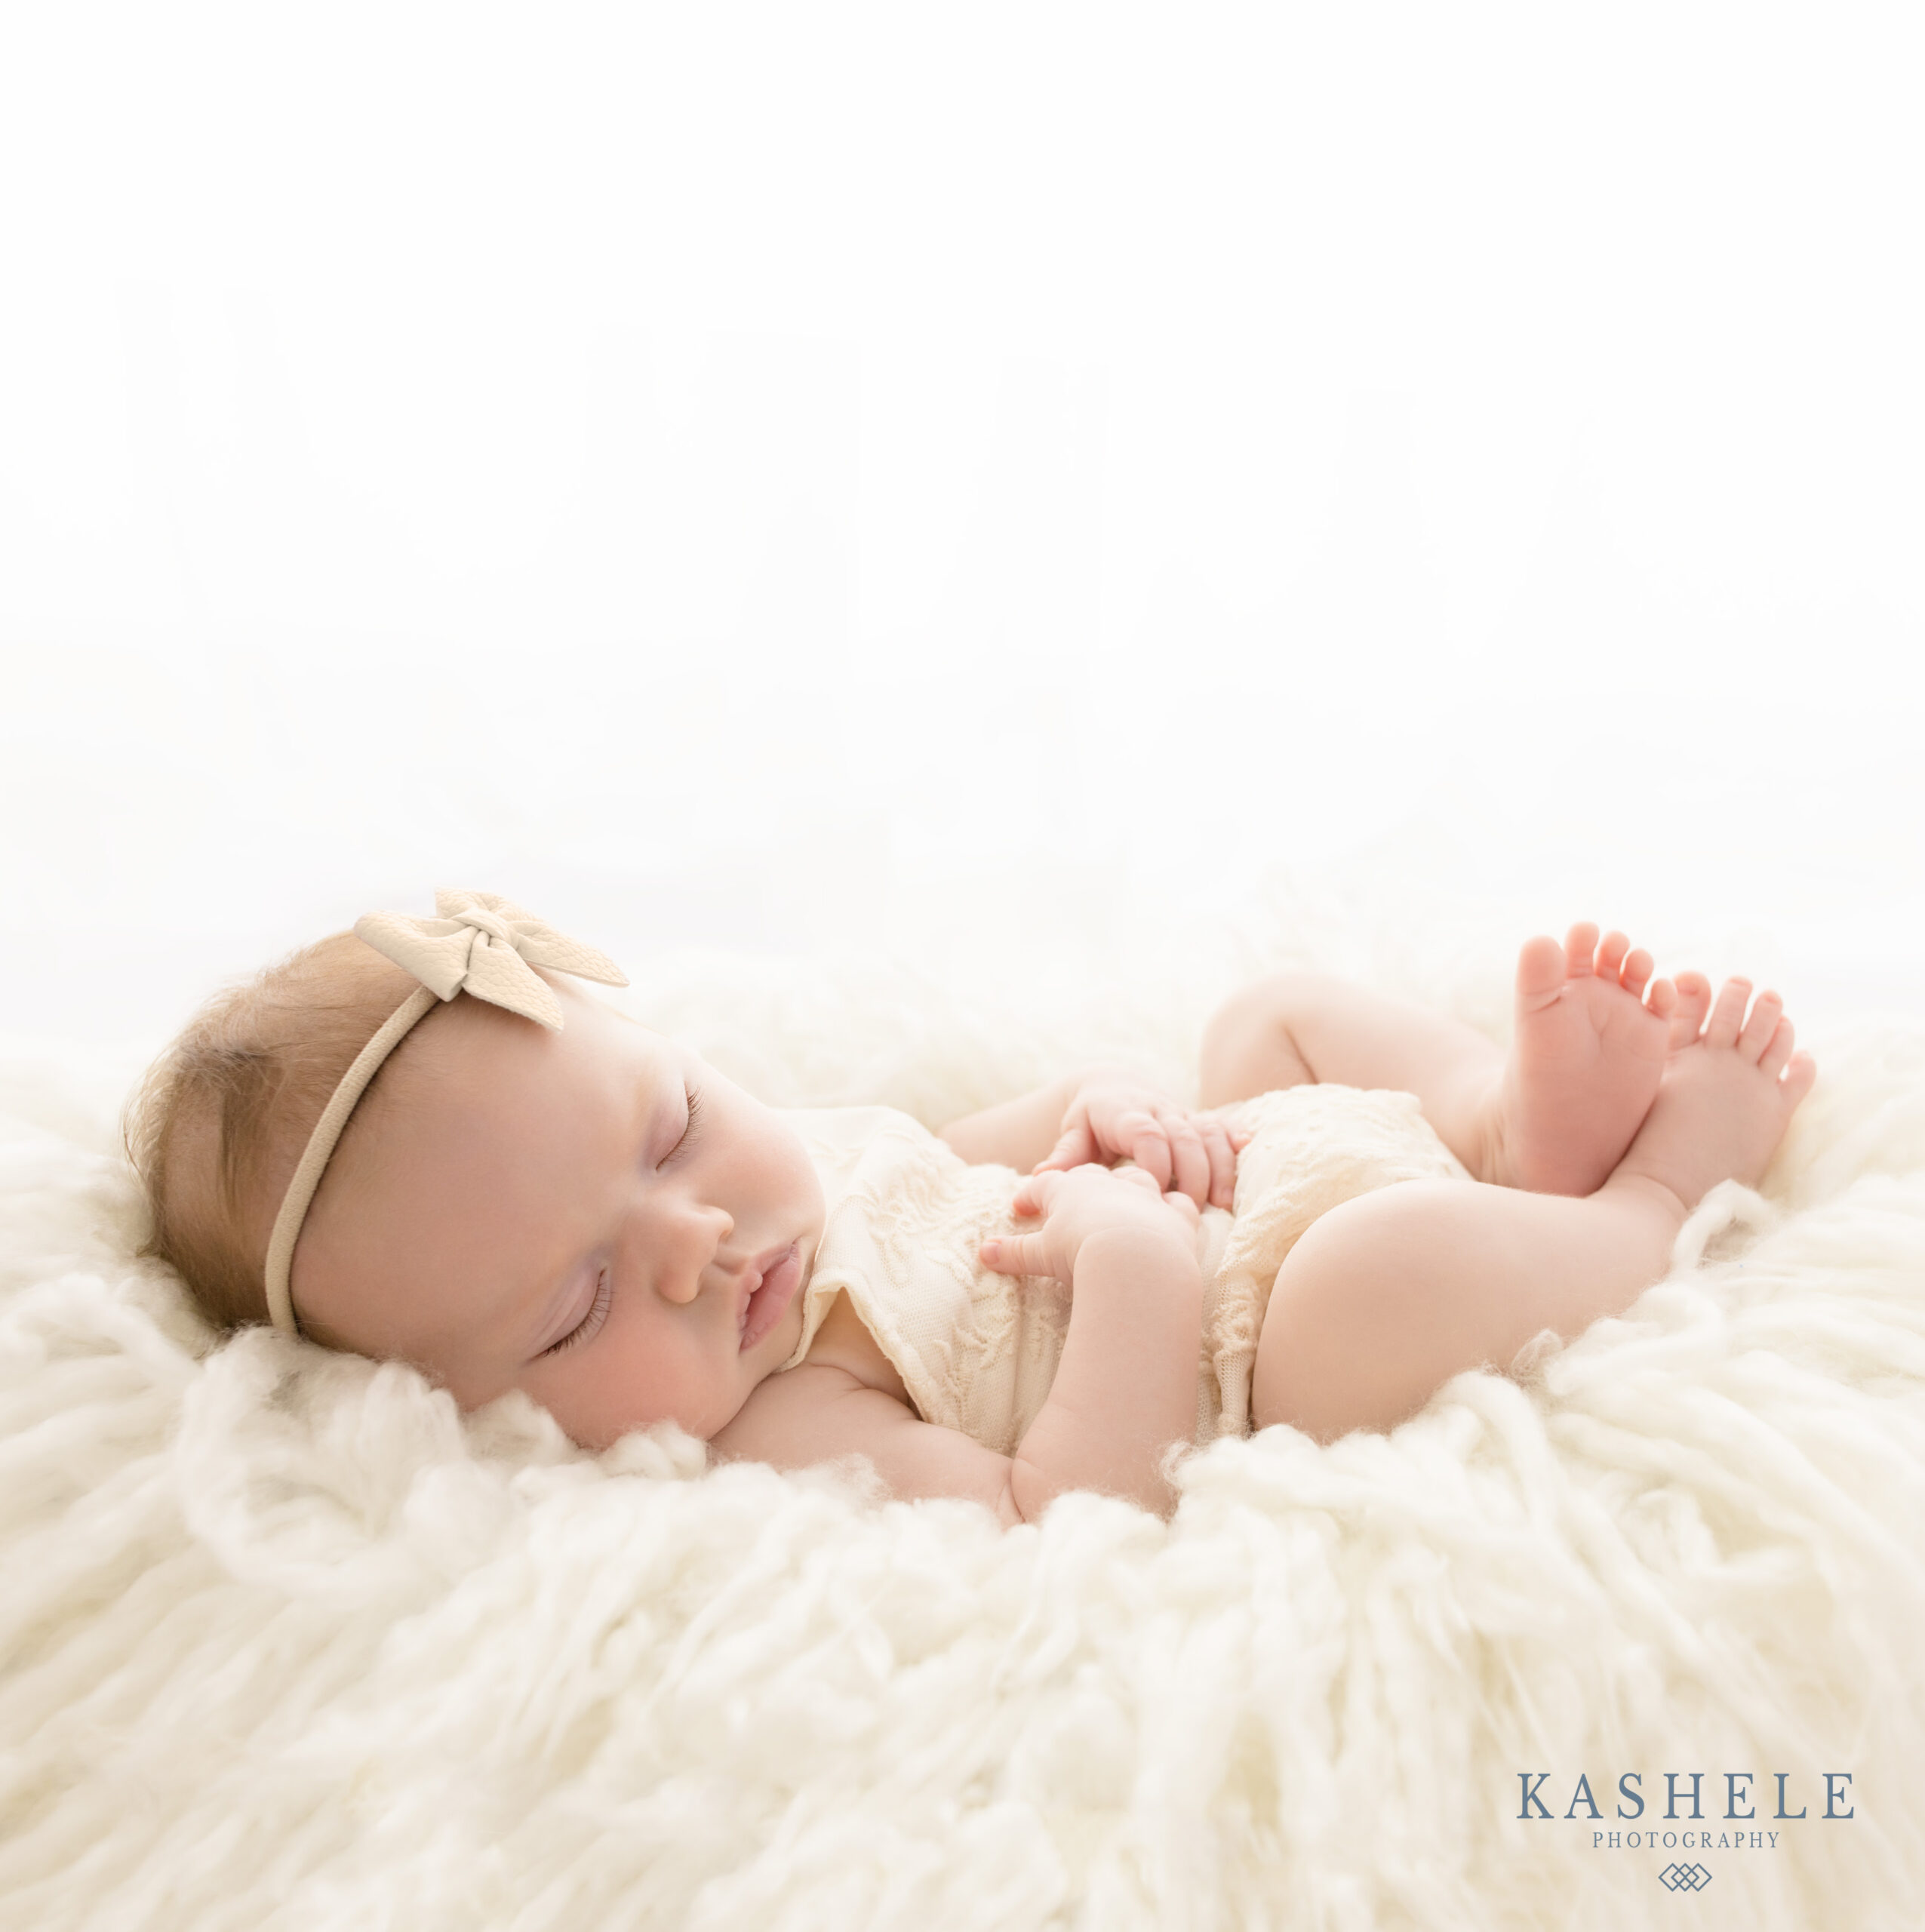 5 Helpful Tips When Capturing Monthly Baby Photos